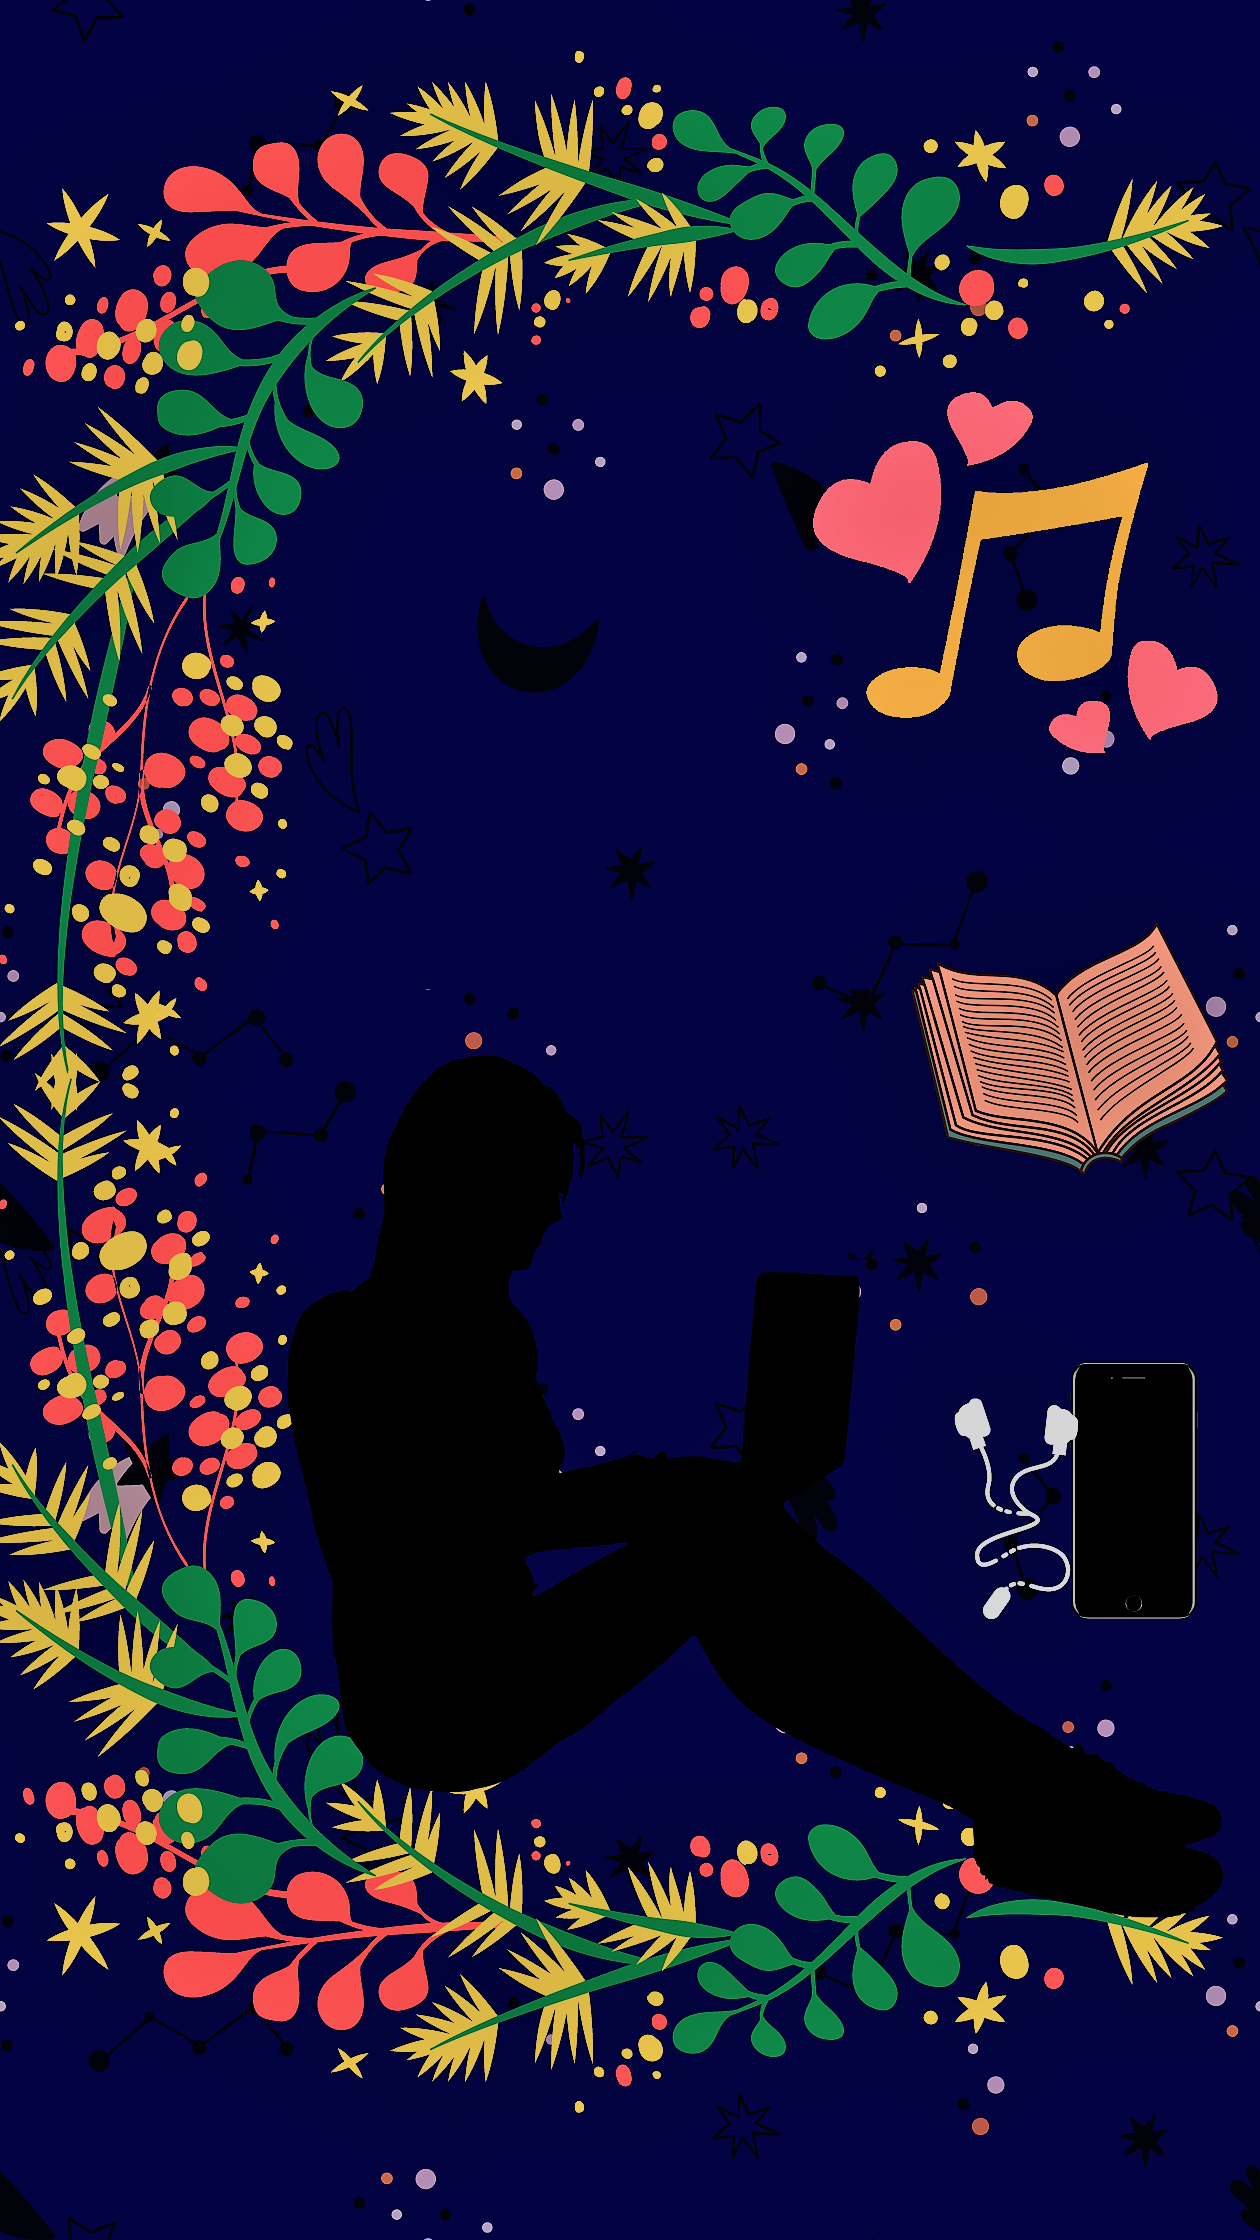 Black silhouette of a female is sitting with knees drawn up and a laptop balanced on her knees, framed against a navy blue background and surrounded by flower wreaths and other images. This image depicts the central theme of the blog, that is, lazy times and wondering.